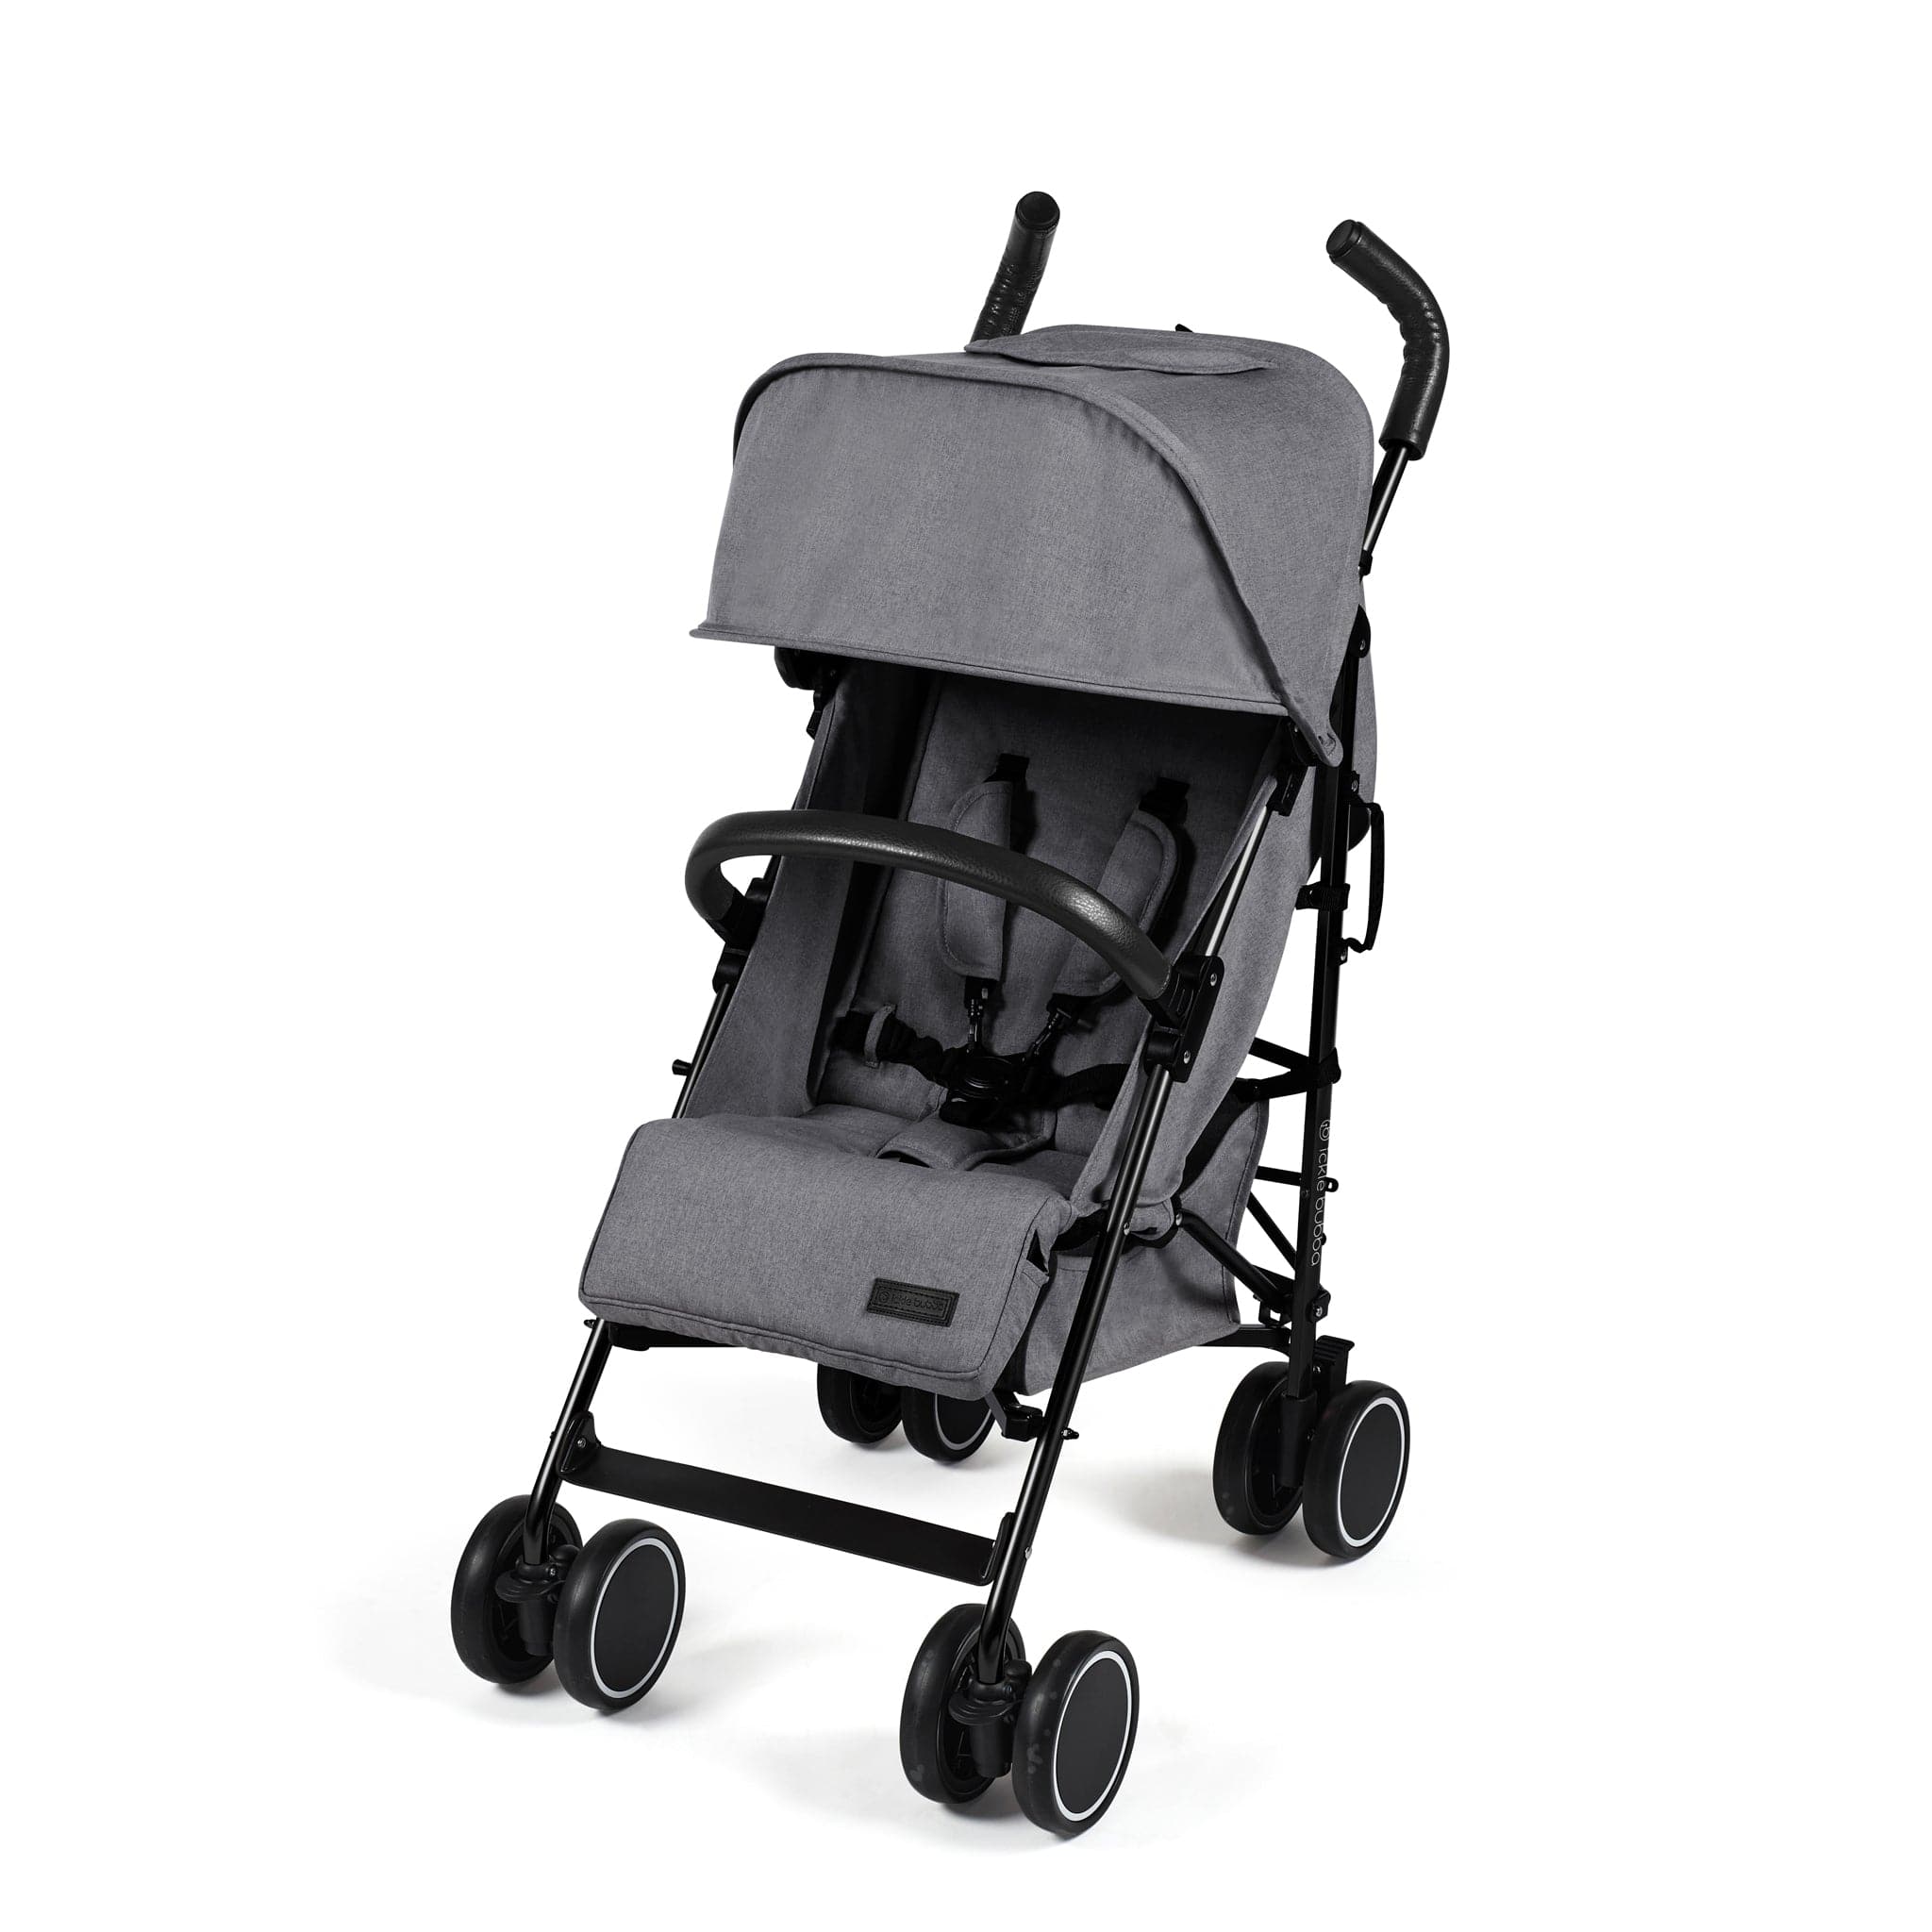 Ickle Bubba baby pushchairs Ickle Bubba Discovery Pushchair Graphite Grey/Matt Black 15-002-100-120